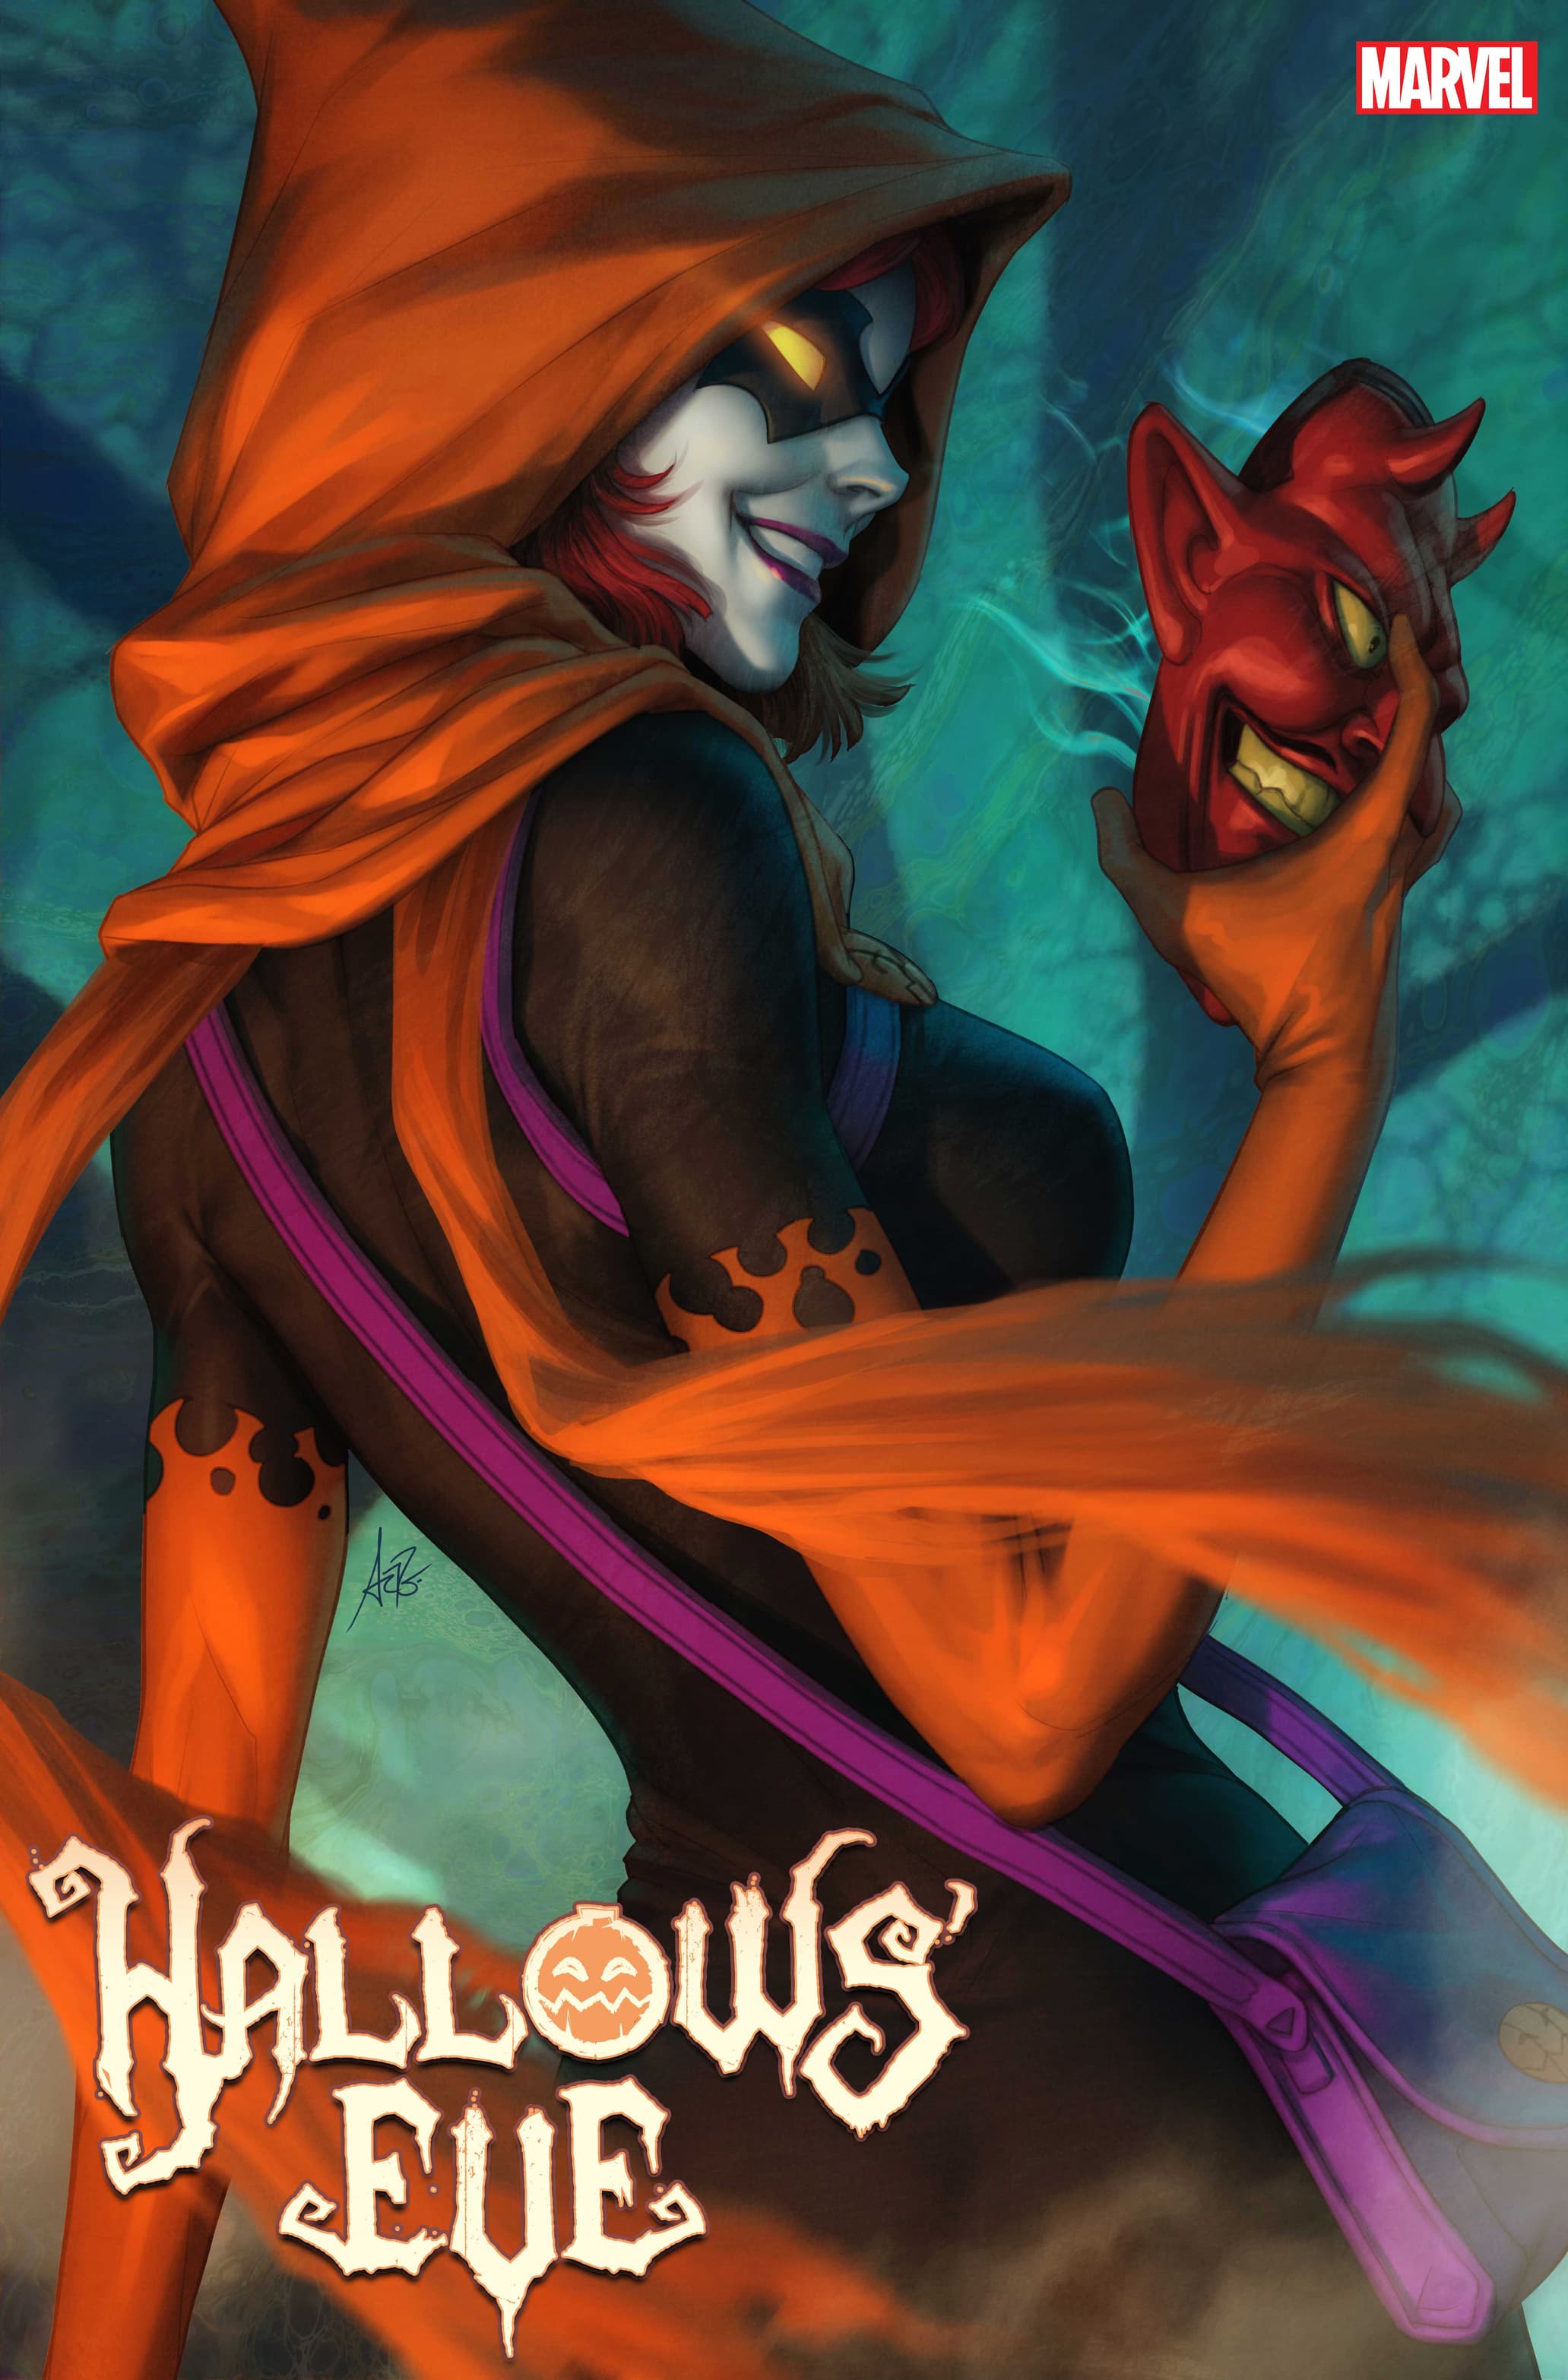 HALLOWS’ EVE #1 Variant Cover by Stanley “Artgerm” Lau